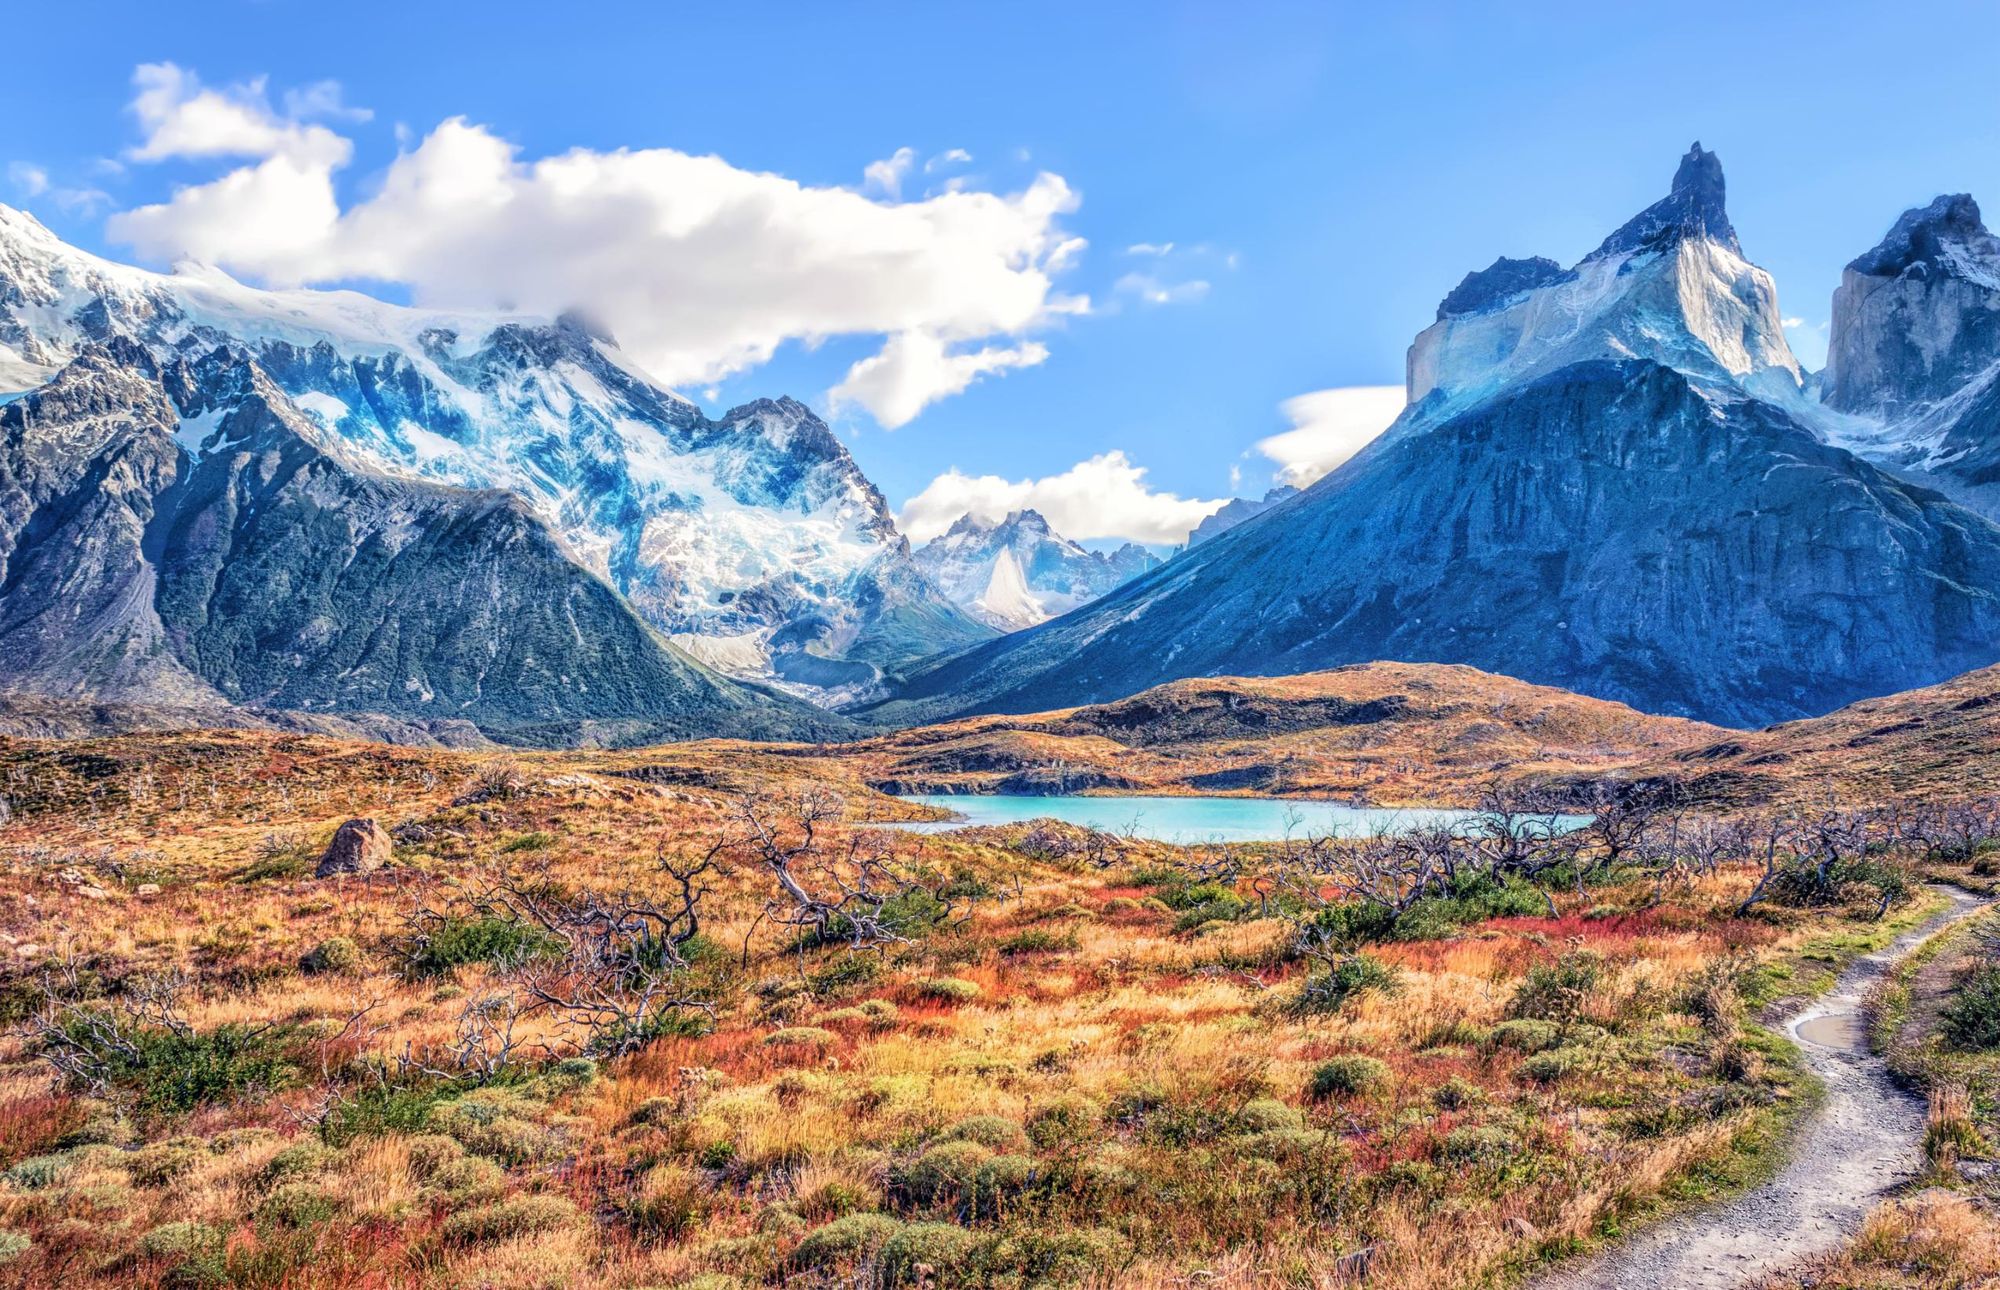 A path near Mirador Cuernos in Torres del Paine National Park, Patagonia, Chile. Photo: Getty